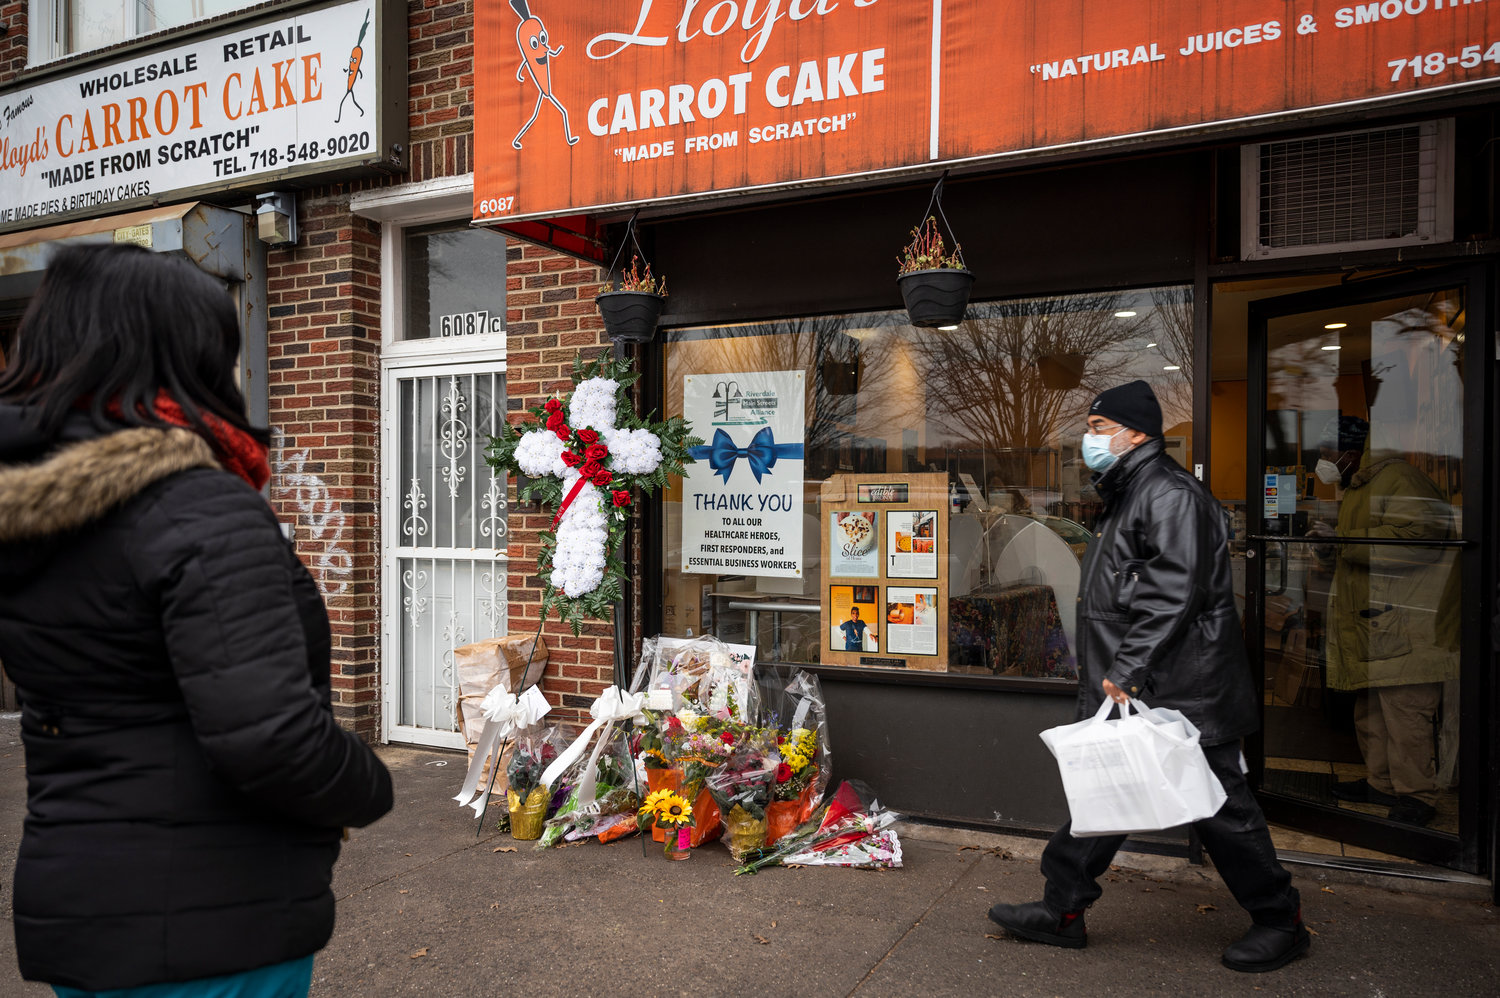 The community rallied around Lloyd’s Carrot Cake in the days following the death of its co-founder, Betty Campbell-Adams. Elected officials joined community organizations like the Female Fight Club in a vigil outside the bakery the evening after her death was announced.